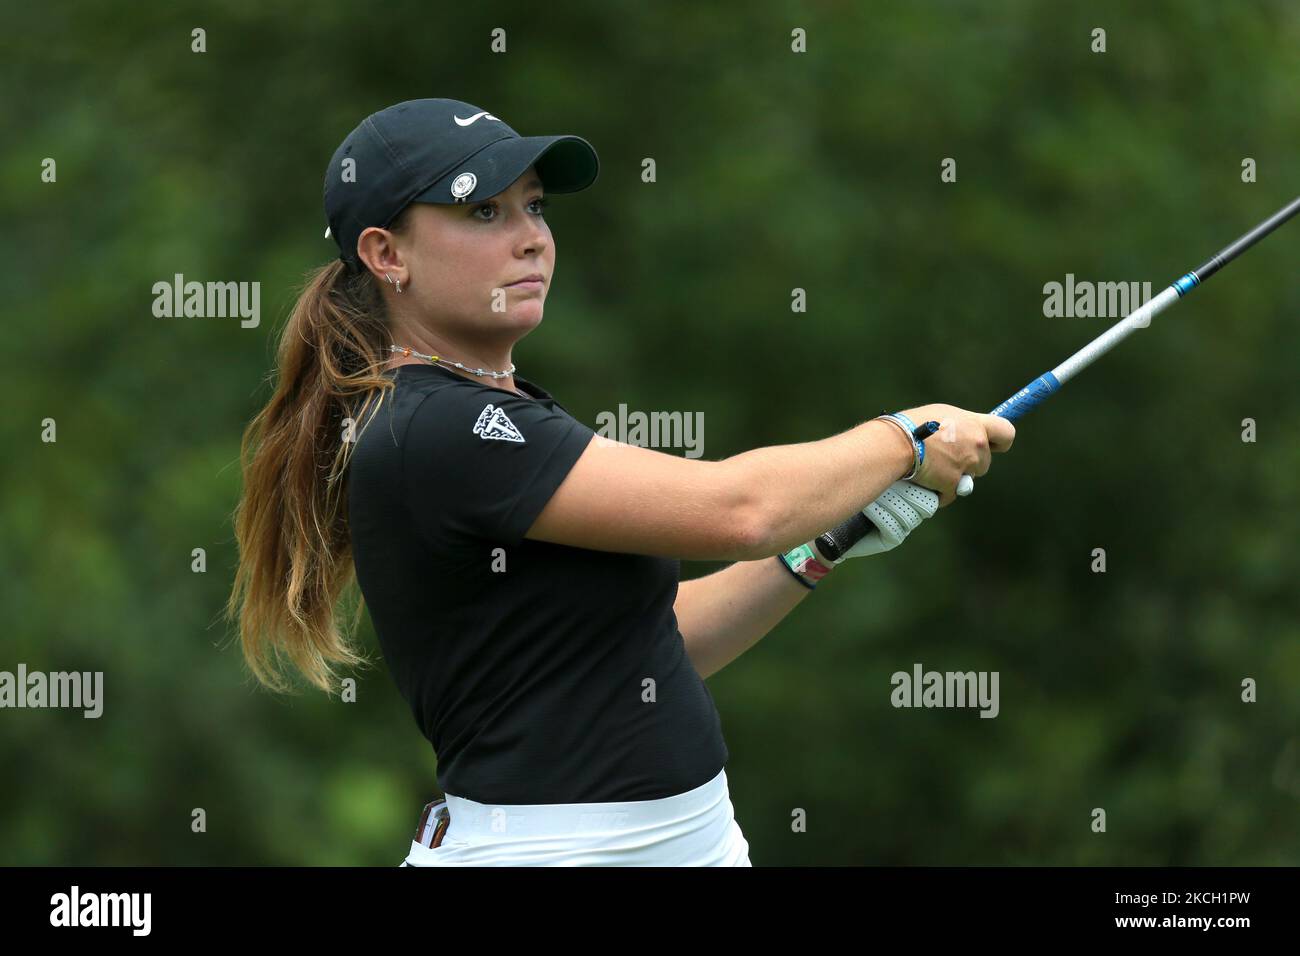 Kennedy Swann tees off on the third tee during the first round of the Marathon LPGA Classic presented by Dana golf tournament at Highland Meadows Golf Club in Sylvania, Ohio USA, on Thursday, July 8, 2021. (Photo by Jorge Lemus/NurPhoto) Stock Photo